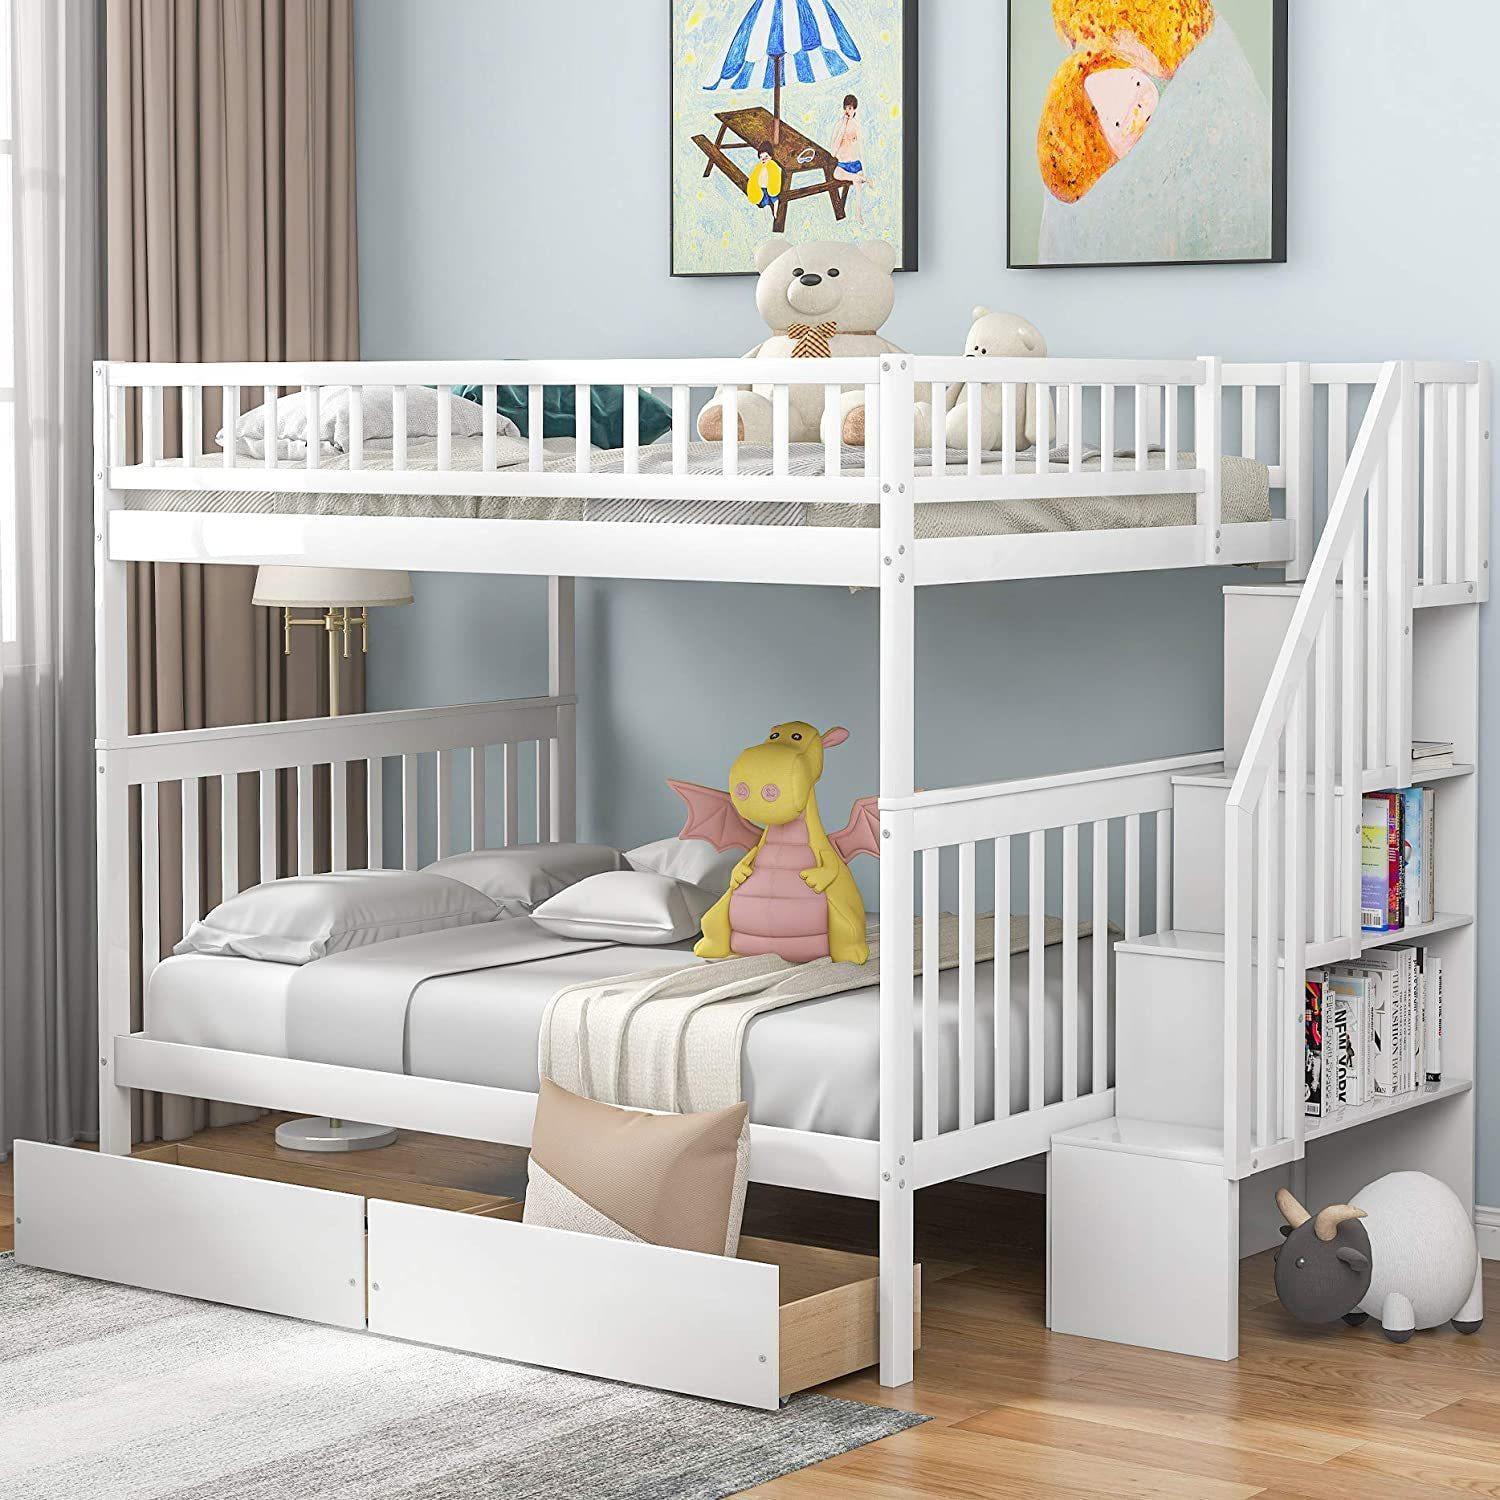 Solid Wood Full Bunk Beds With Drawers, Shyann Bunk Bed